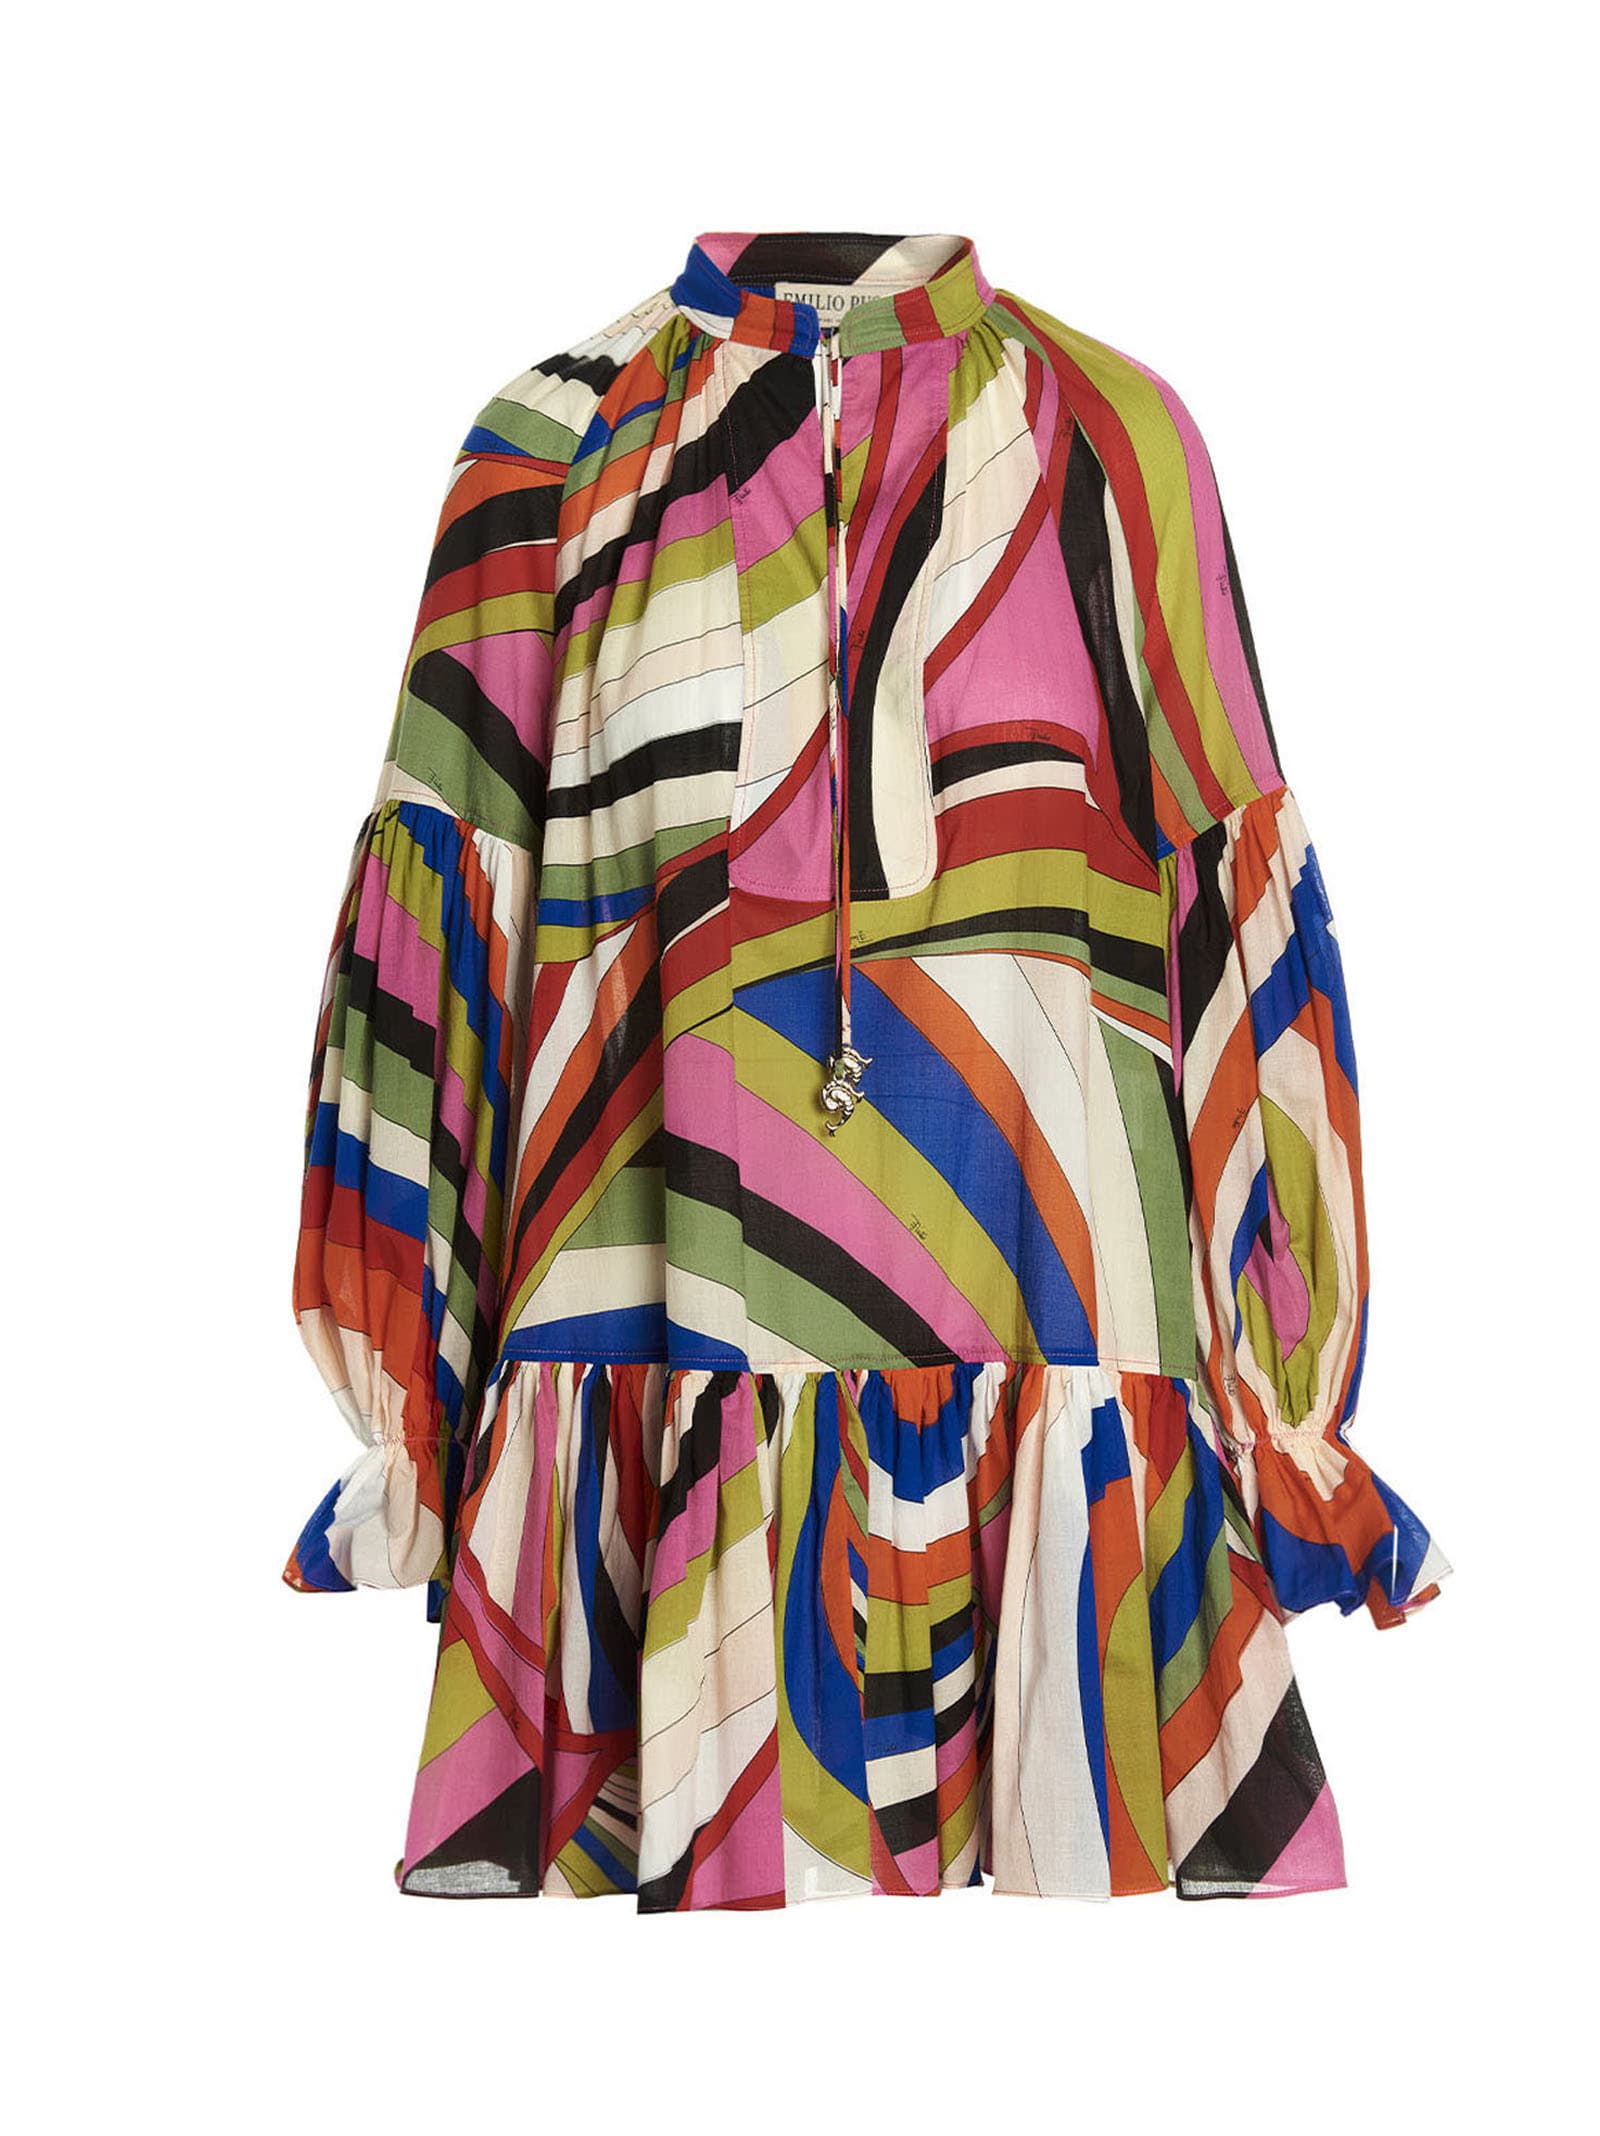 EMILIO PUCCI PRINTED TIERED DRESS